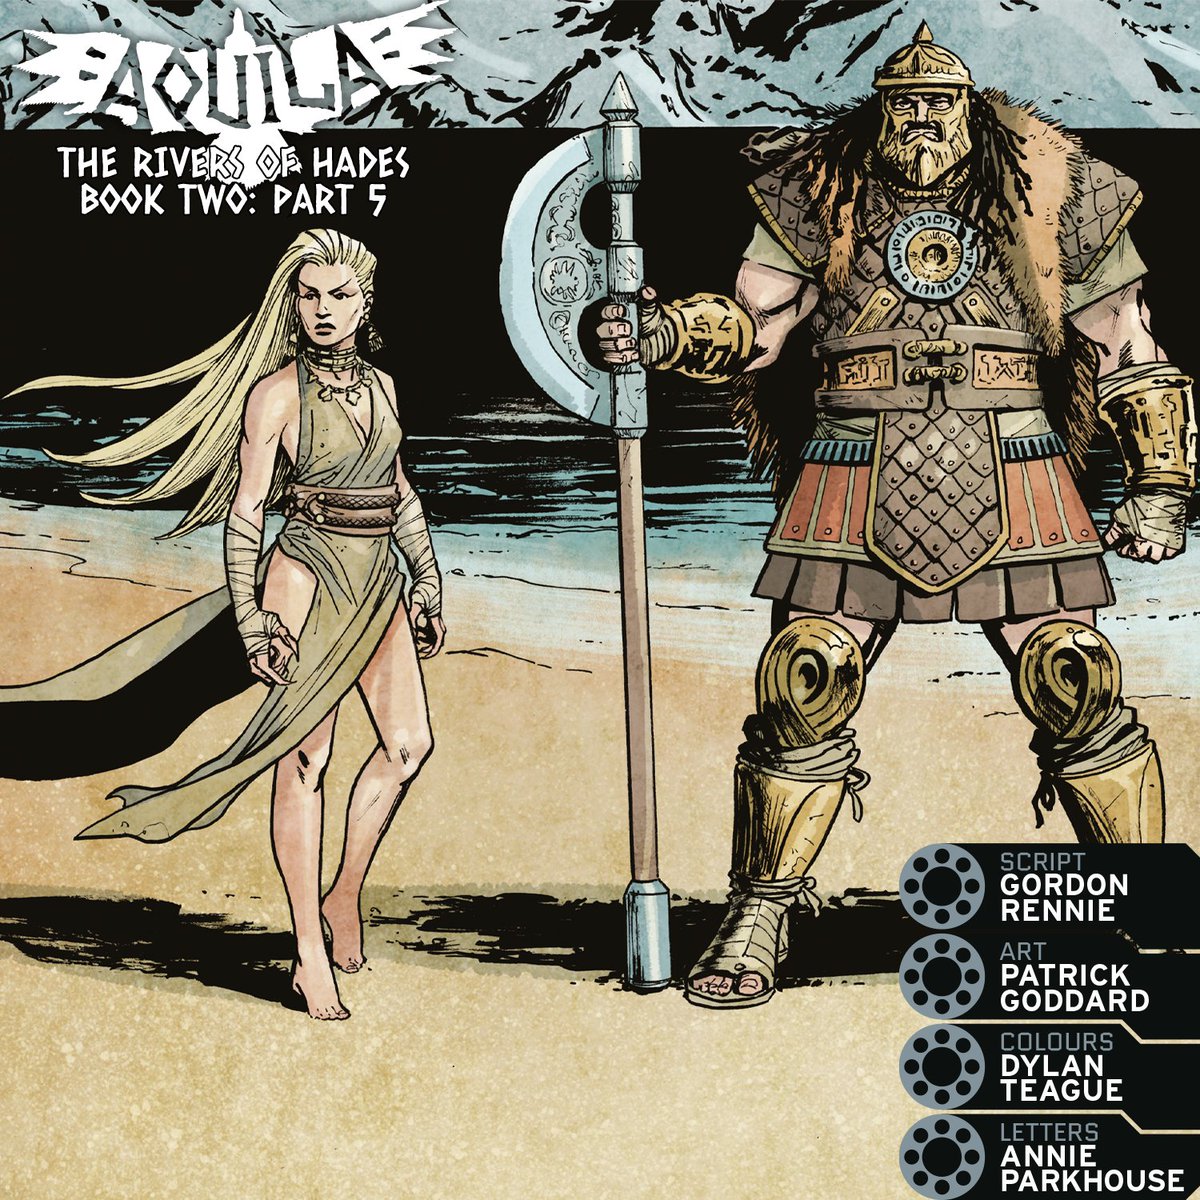 2000 AD Prog 2381 is out on 8th May - featuring AQUILA: THE RIVERS OF HADES BOOK TWO, part five by: 📝 Script: Gordon Rennie ✏️ Art: @PaddyGod1 🎨 Colours: @DylanTeague 💬 Letters: Annie Parkhouse Subscribe now and get zarjaz free gifts ➡️ bit.ly/2Ws04uc